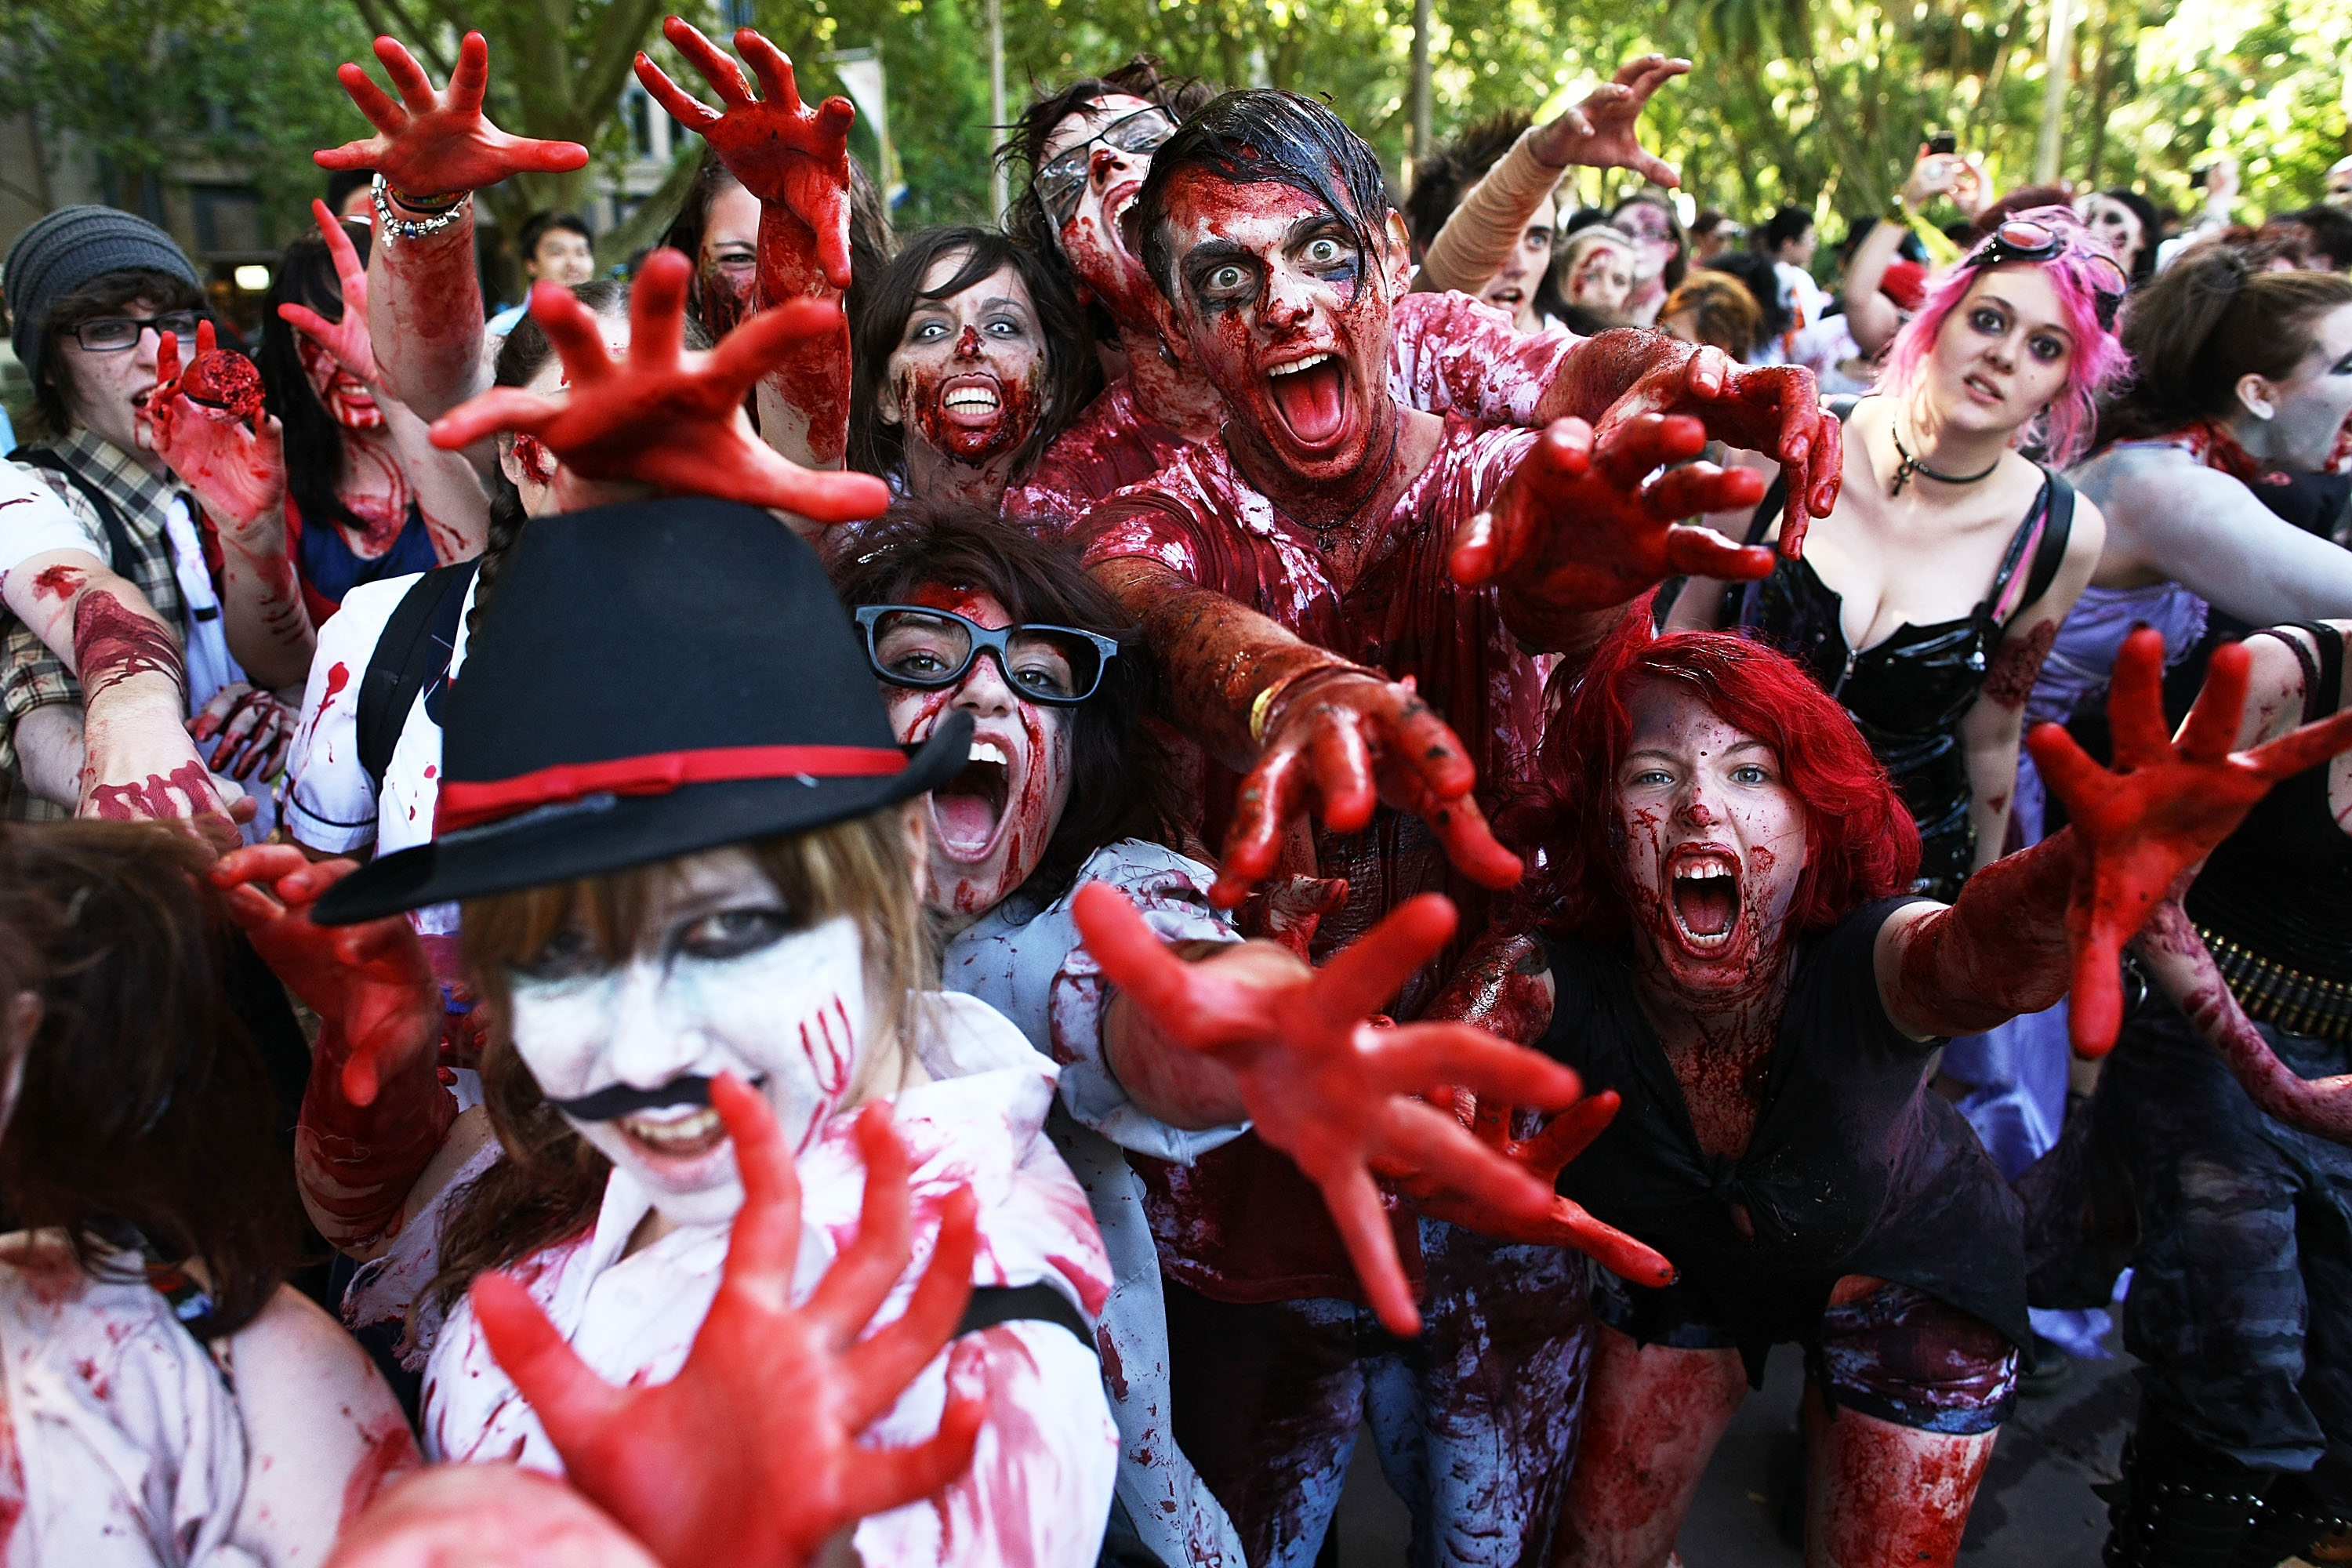 Zombie trend driven by societal unhappiness, professor says